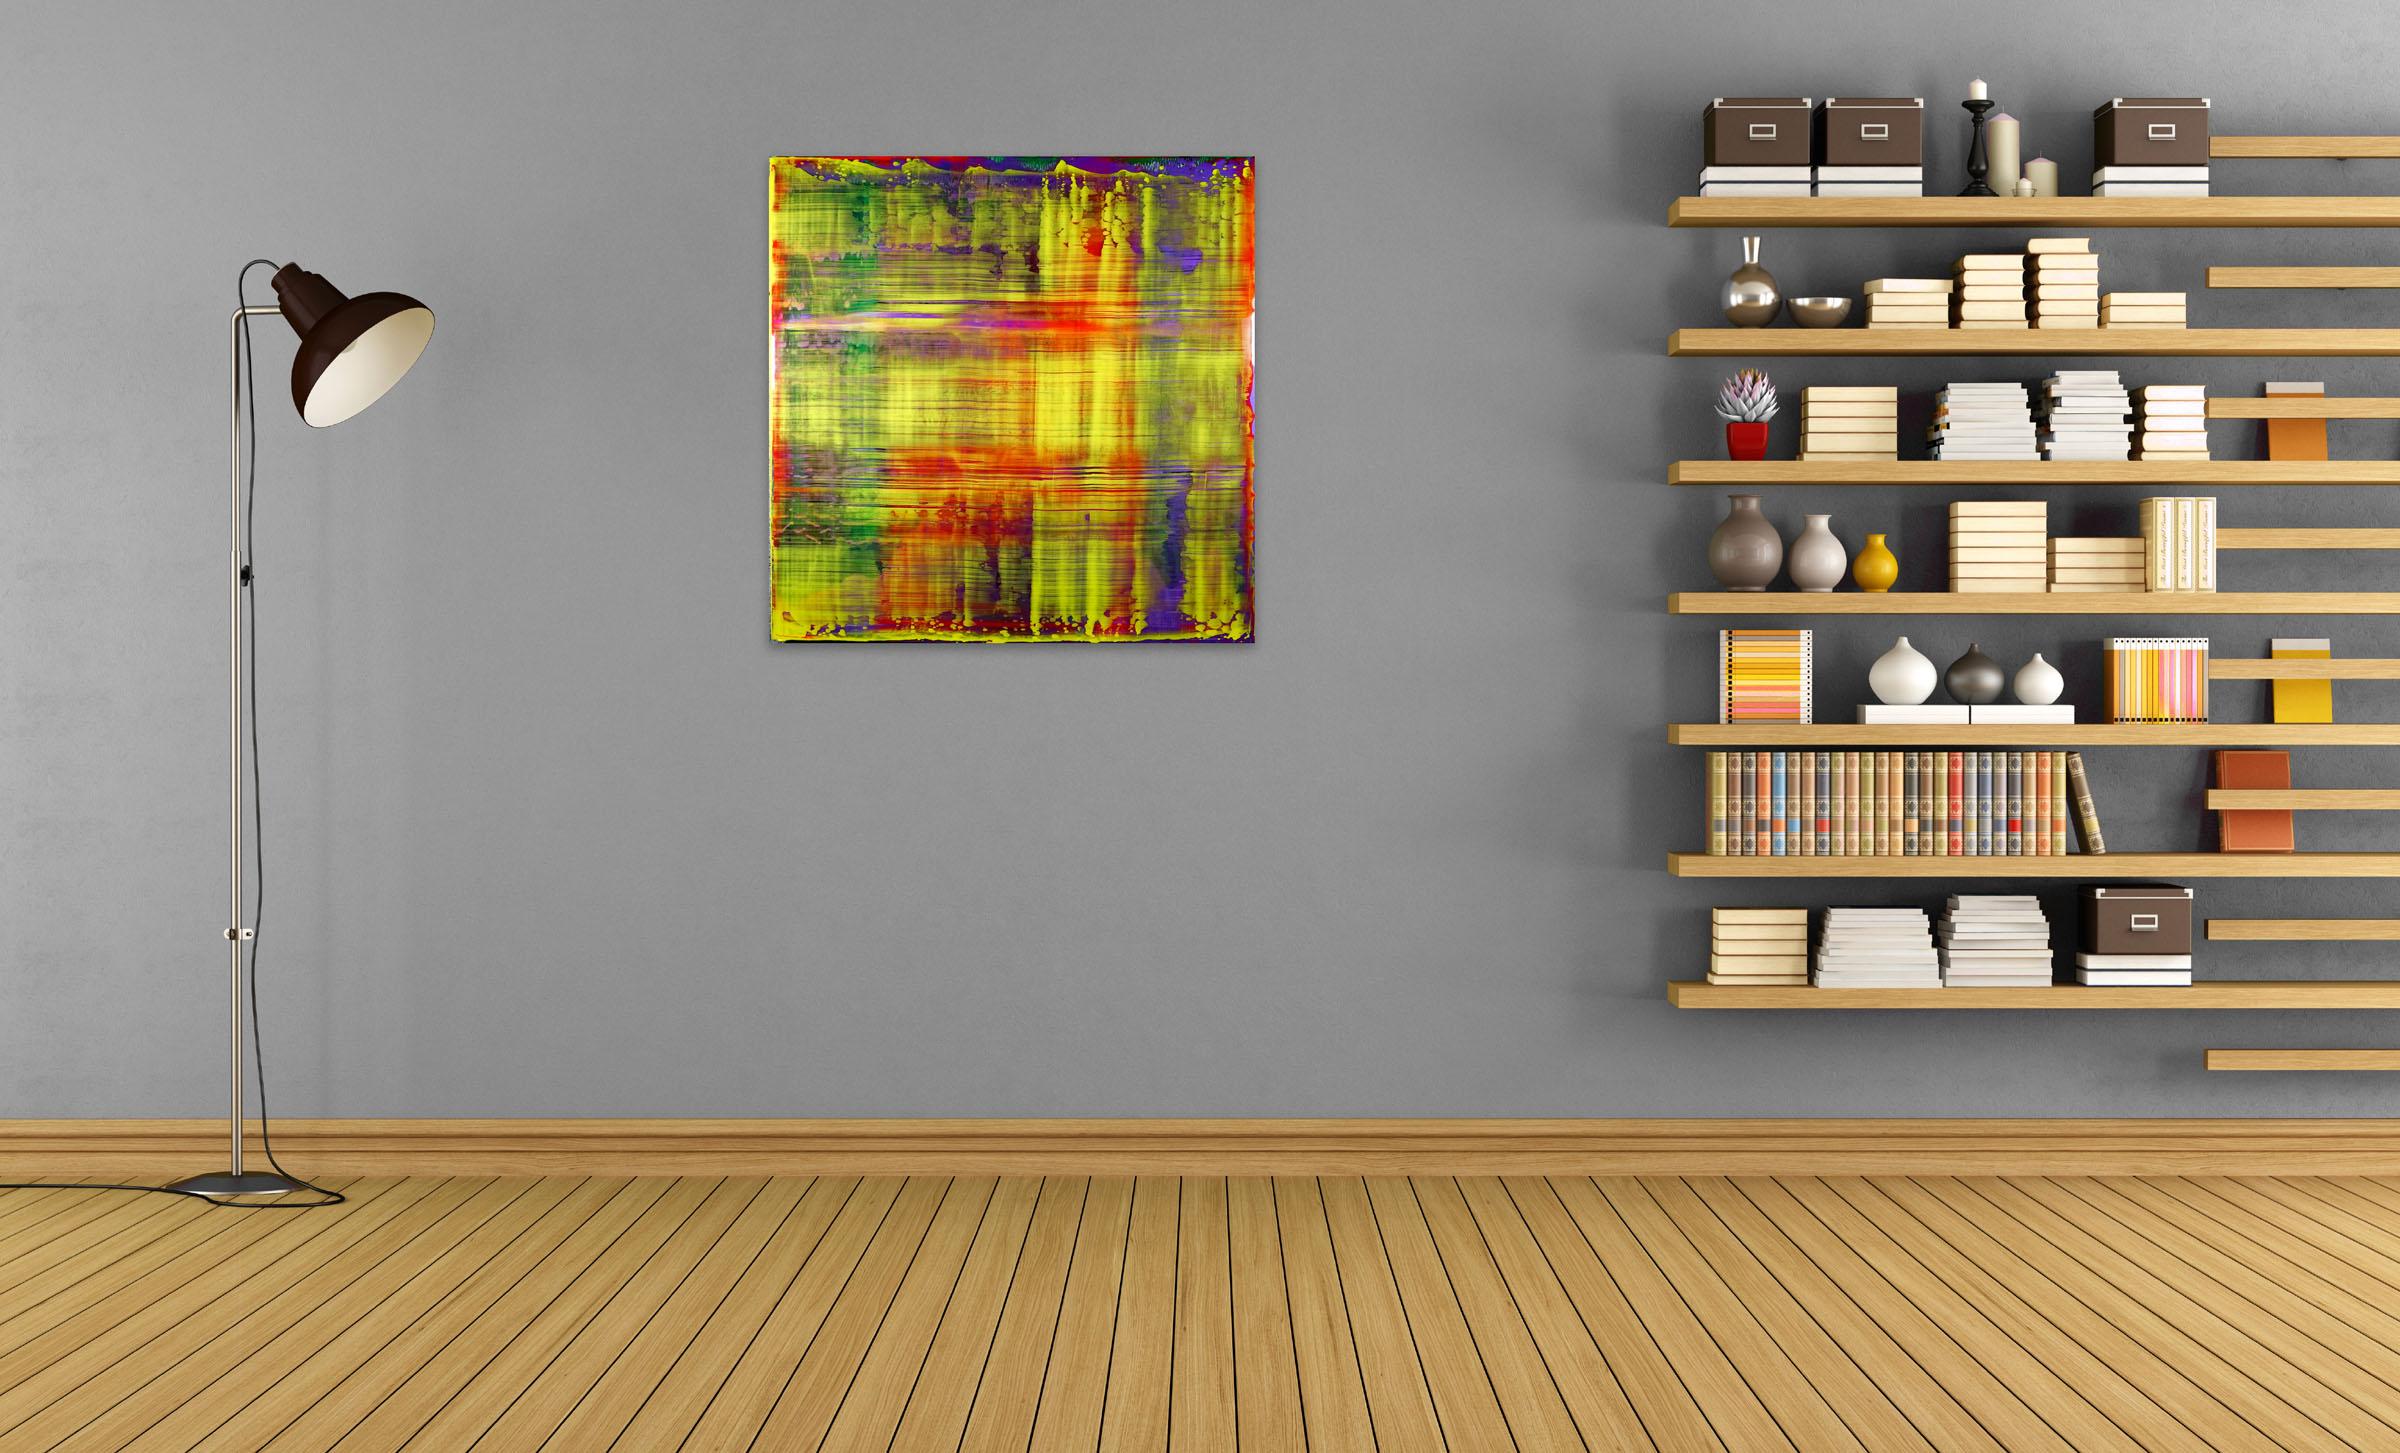 Gerhard Richter (Abstract Painting)

Acrylics, resin, phosphorescence, on wooden board  - Unframed

This artwork is exclusive to IdeelArt. 

Danny Giesbers is a Dutch, autodidact abstract painter who incorporates 21st century developments into his